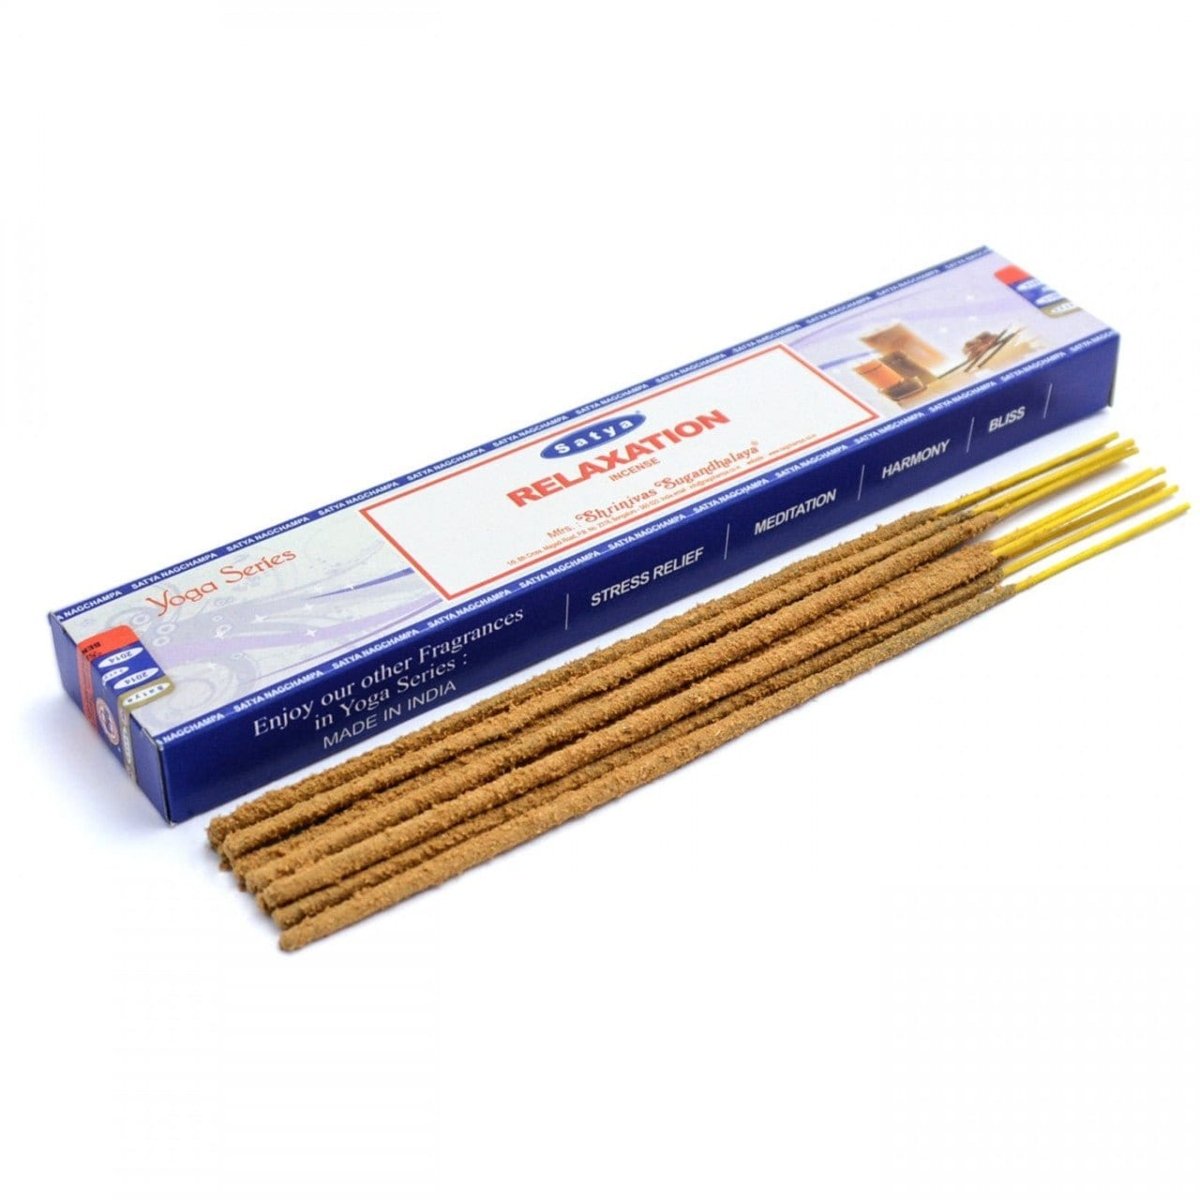 Relaxation Incense Sticks by Satya (Yoga Series) - Flying Wild